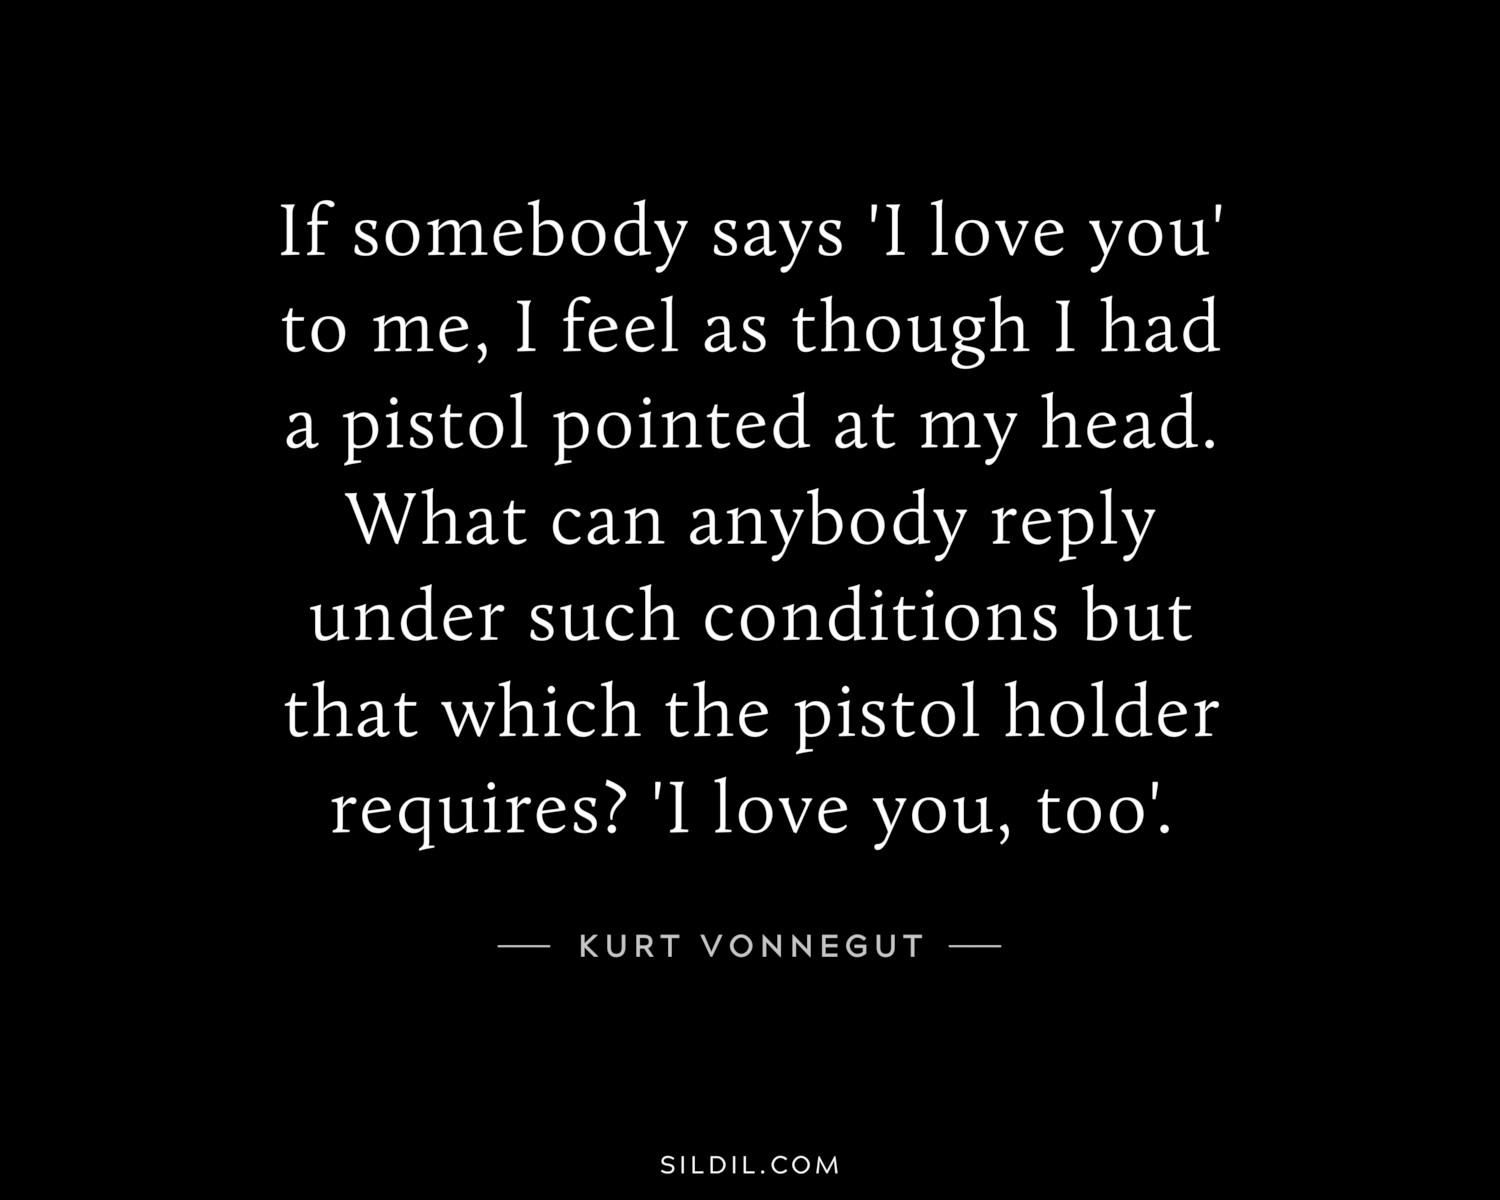 If somebody says 'I love you' to me, I feel as though I had a pistol pointed at my head. What can anybody reply under such conditions but that which the pistol holder requires? 'I love you, too'.